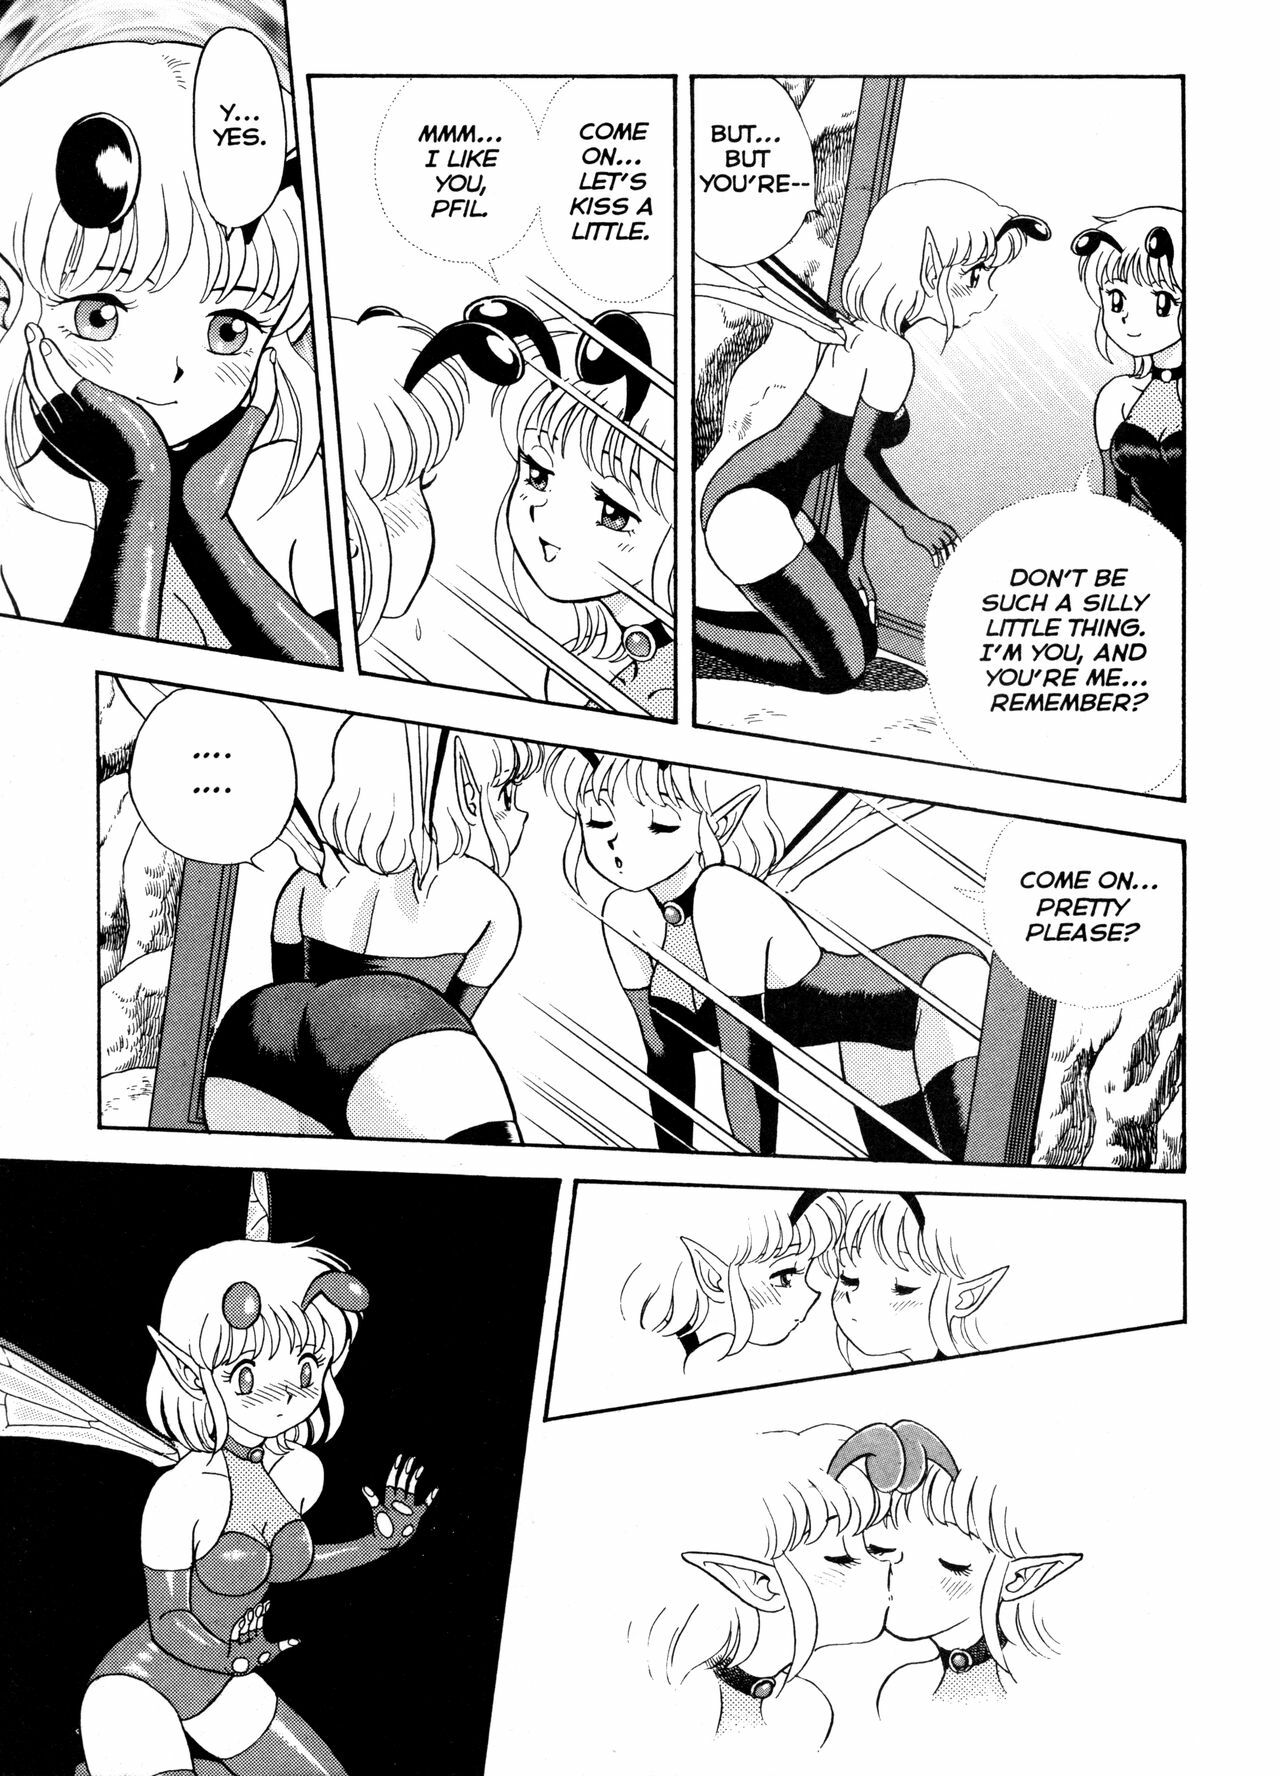 [Kondom] The New Bondage Fairies Issue 14 [ENG][Hi-Res] page 8 full